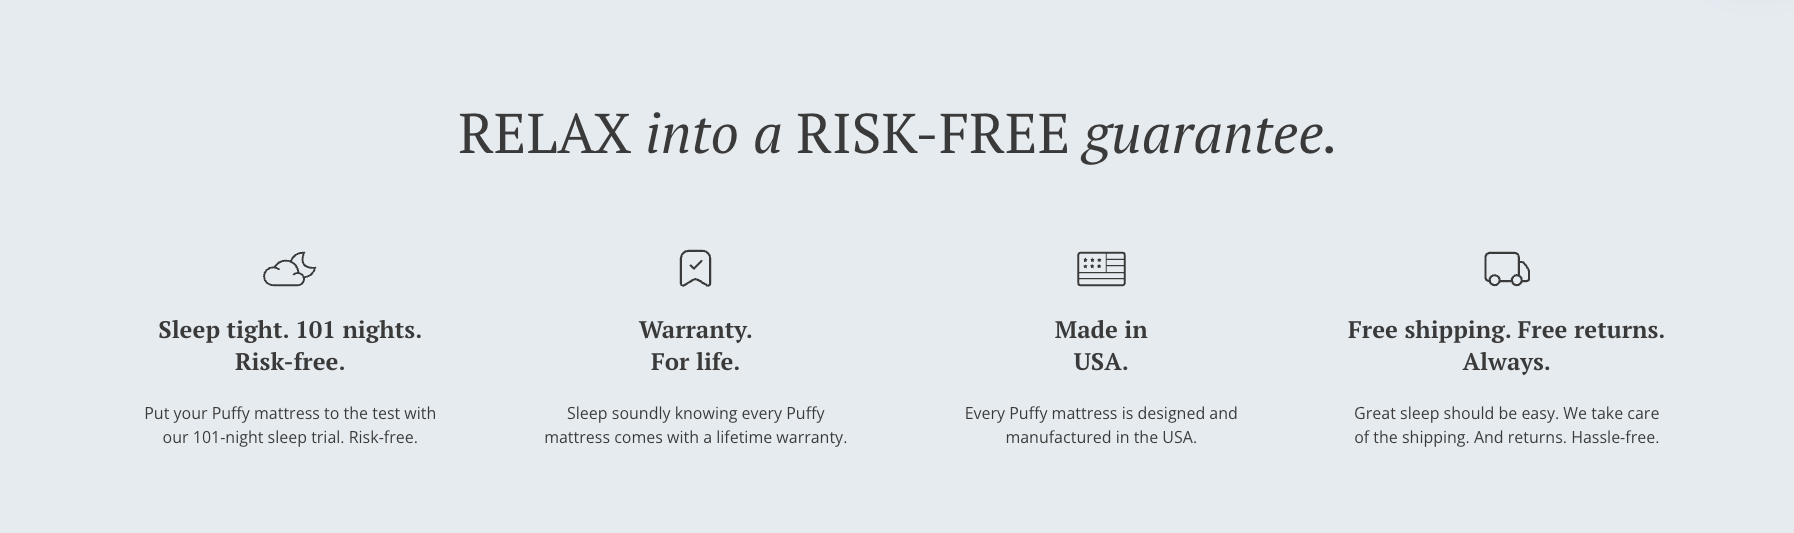 Relax into a Risk-Free Guarantee